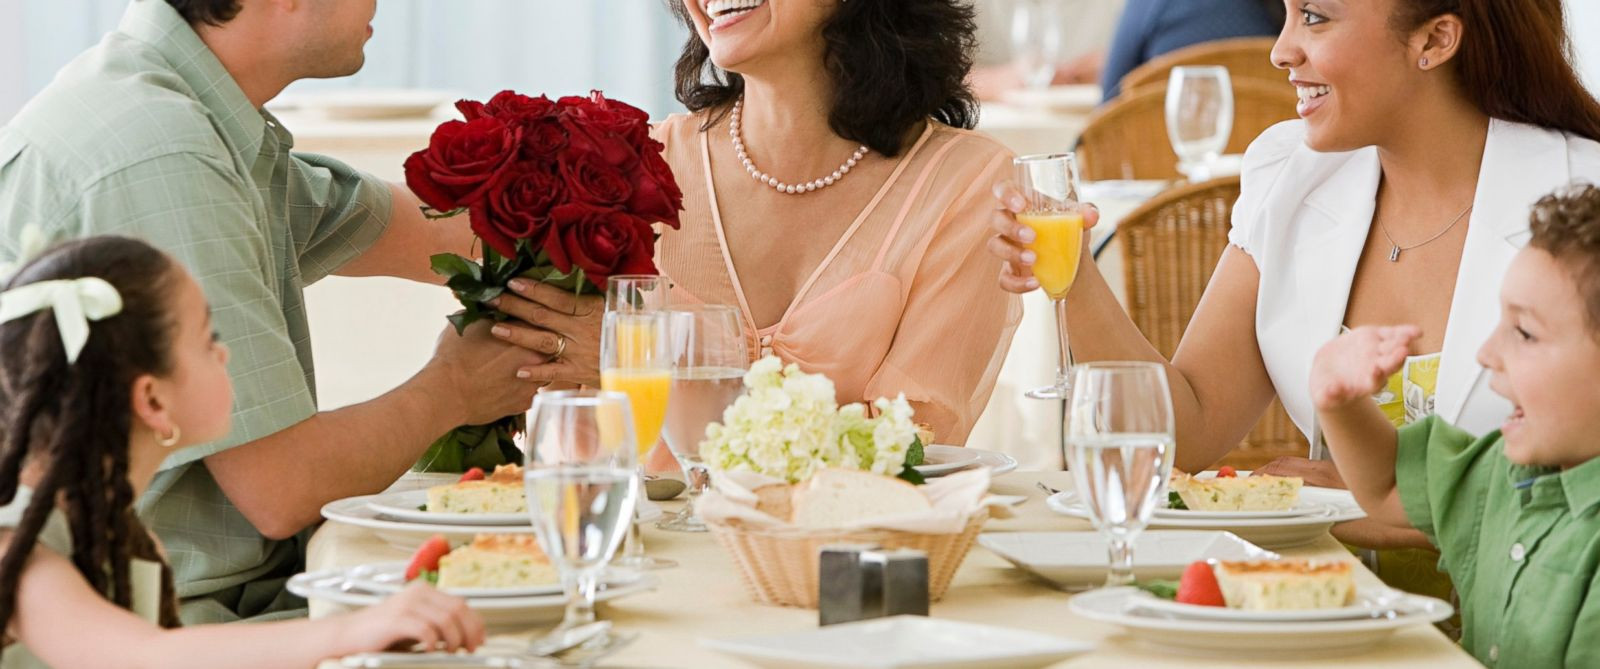 Mothers Day Dinner Restaurant
 Mother s Day 2015 Dining Deals and Freebies ABC News